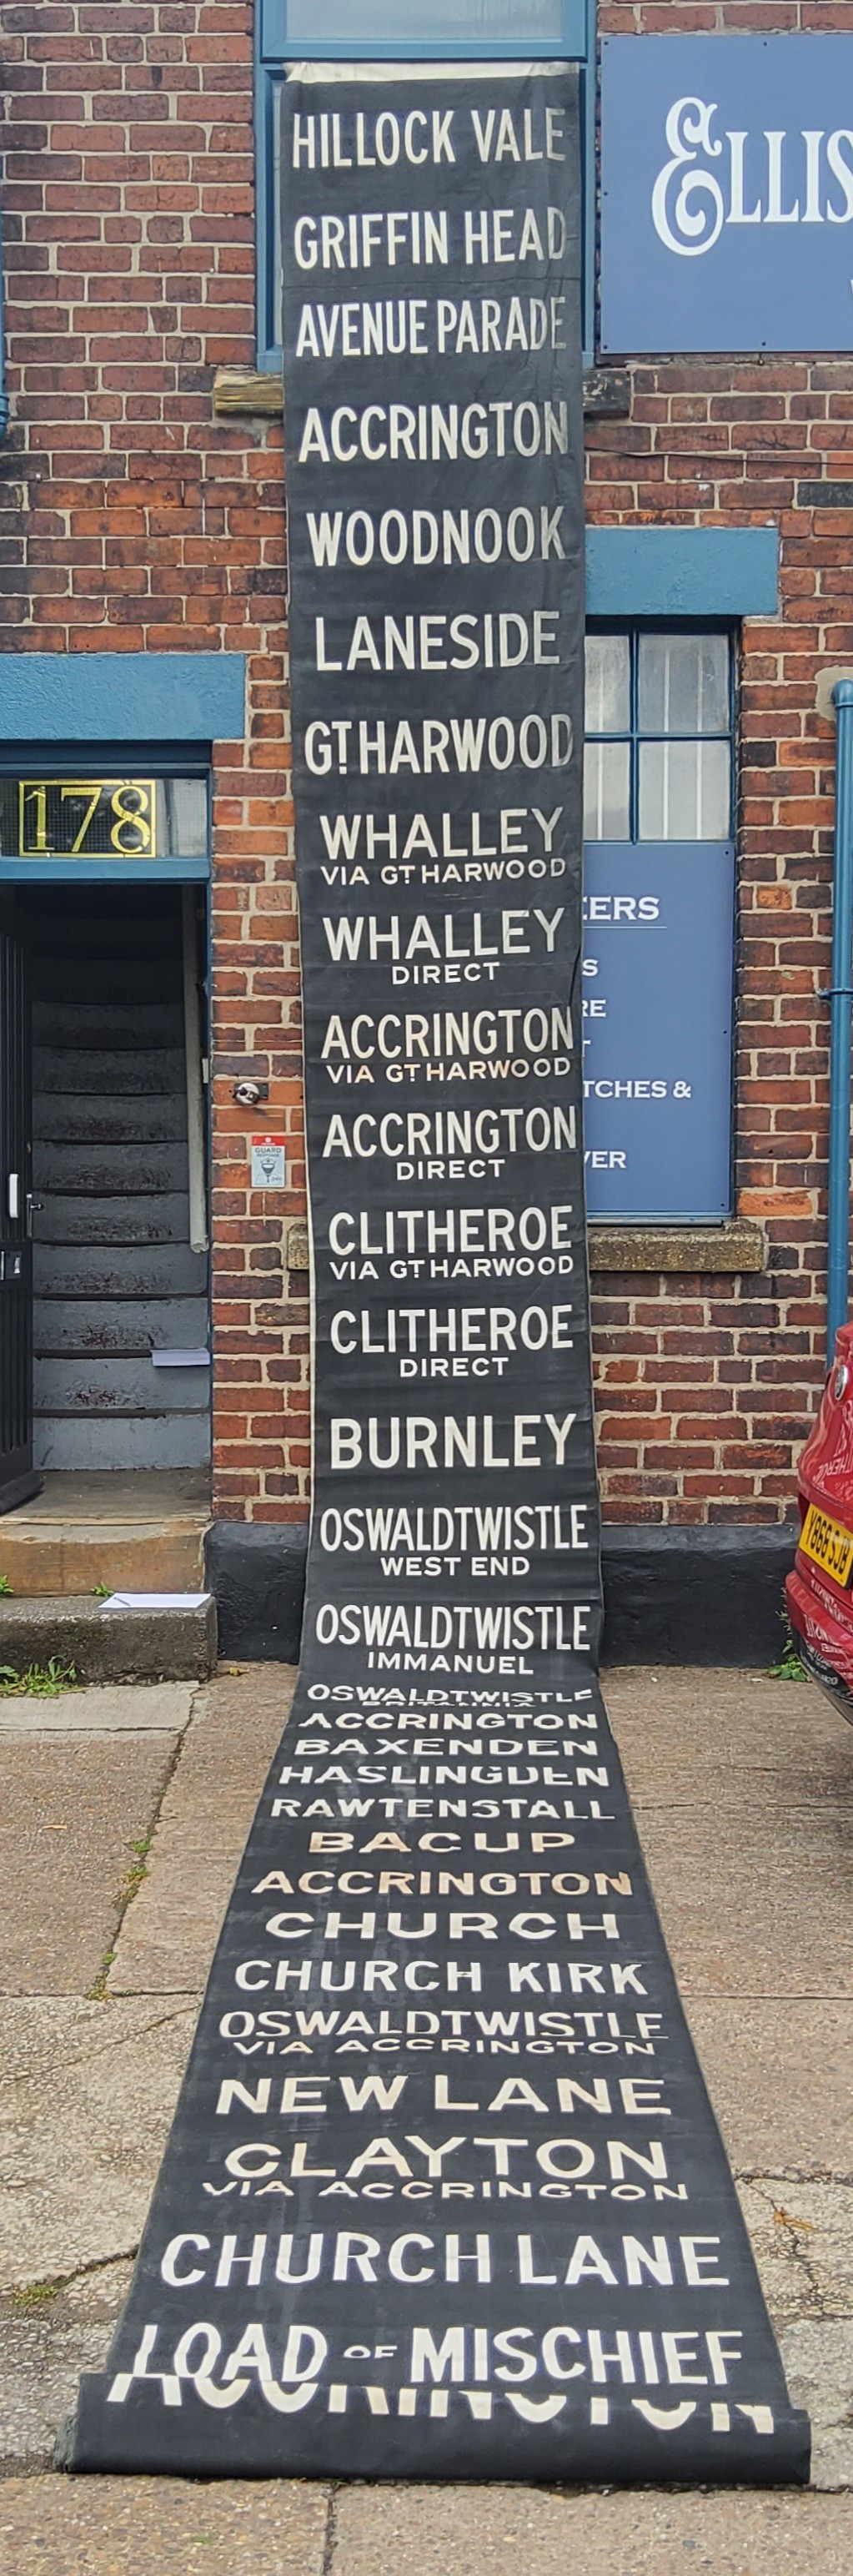 Lancashire - Accrington Corporation  Blind - 52 names in total starting at Hillock Vale calling